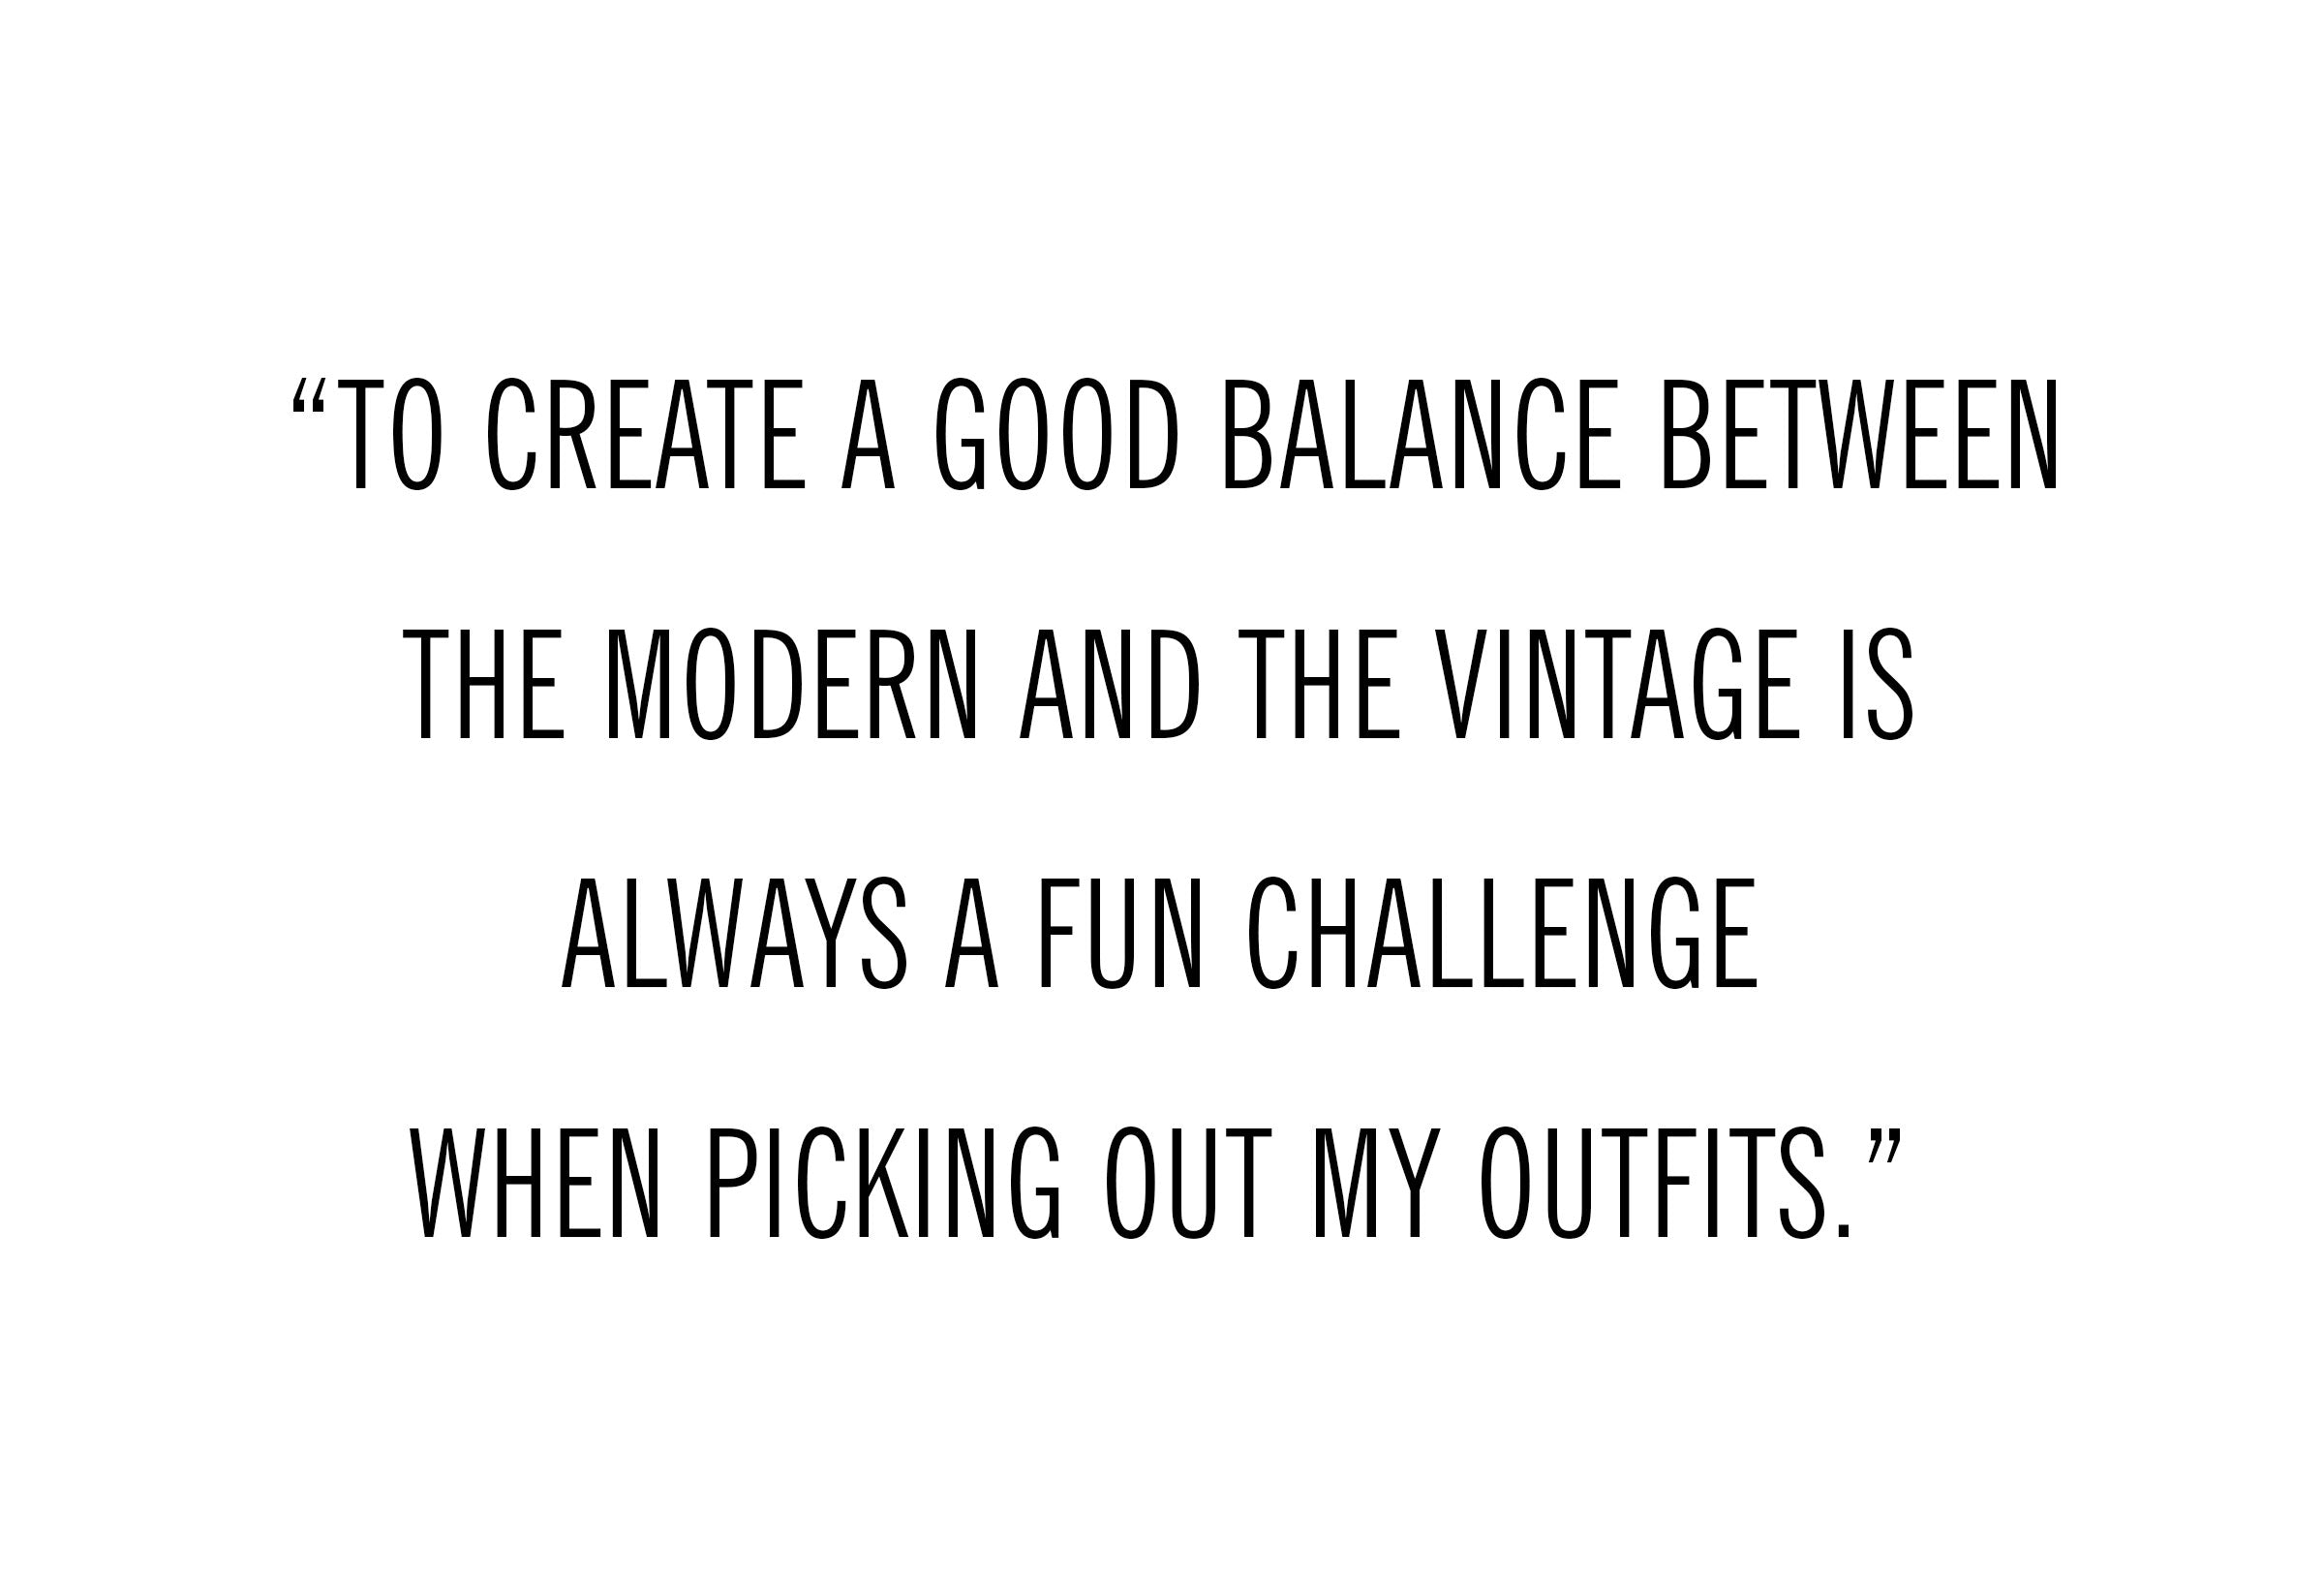 "To create a good balance between the modern and the vintage is always a fun challenge when picking out my outfits." - Michael Cortina